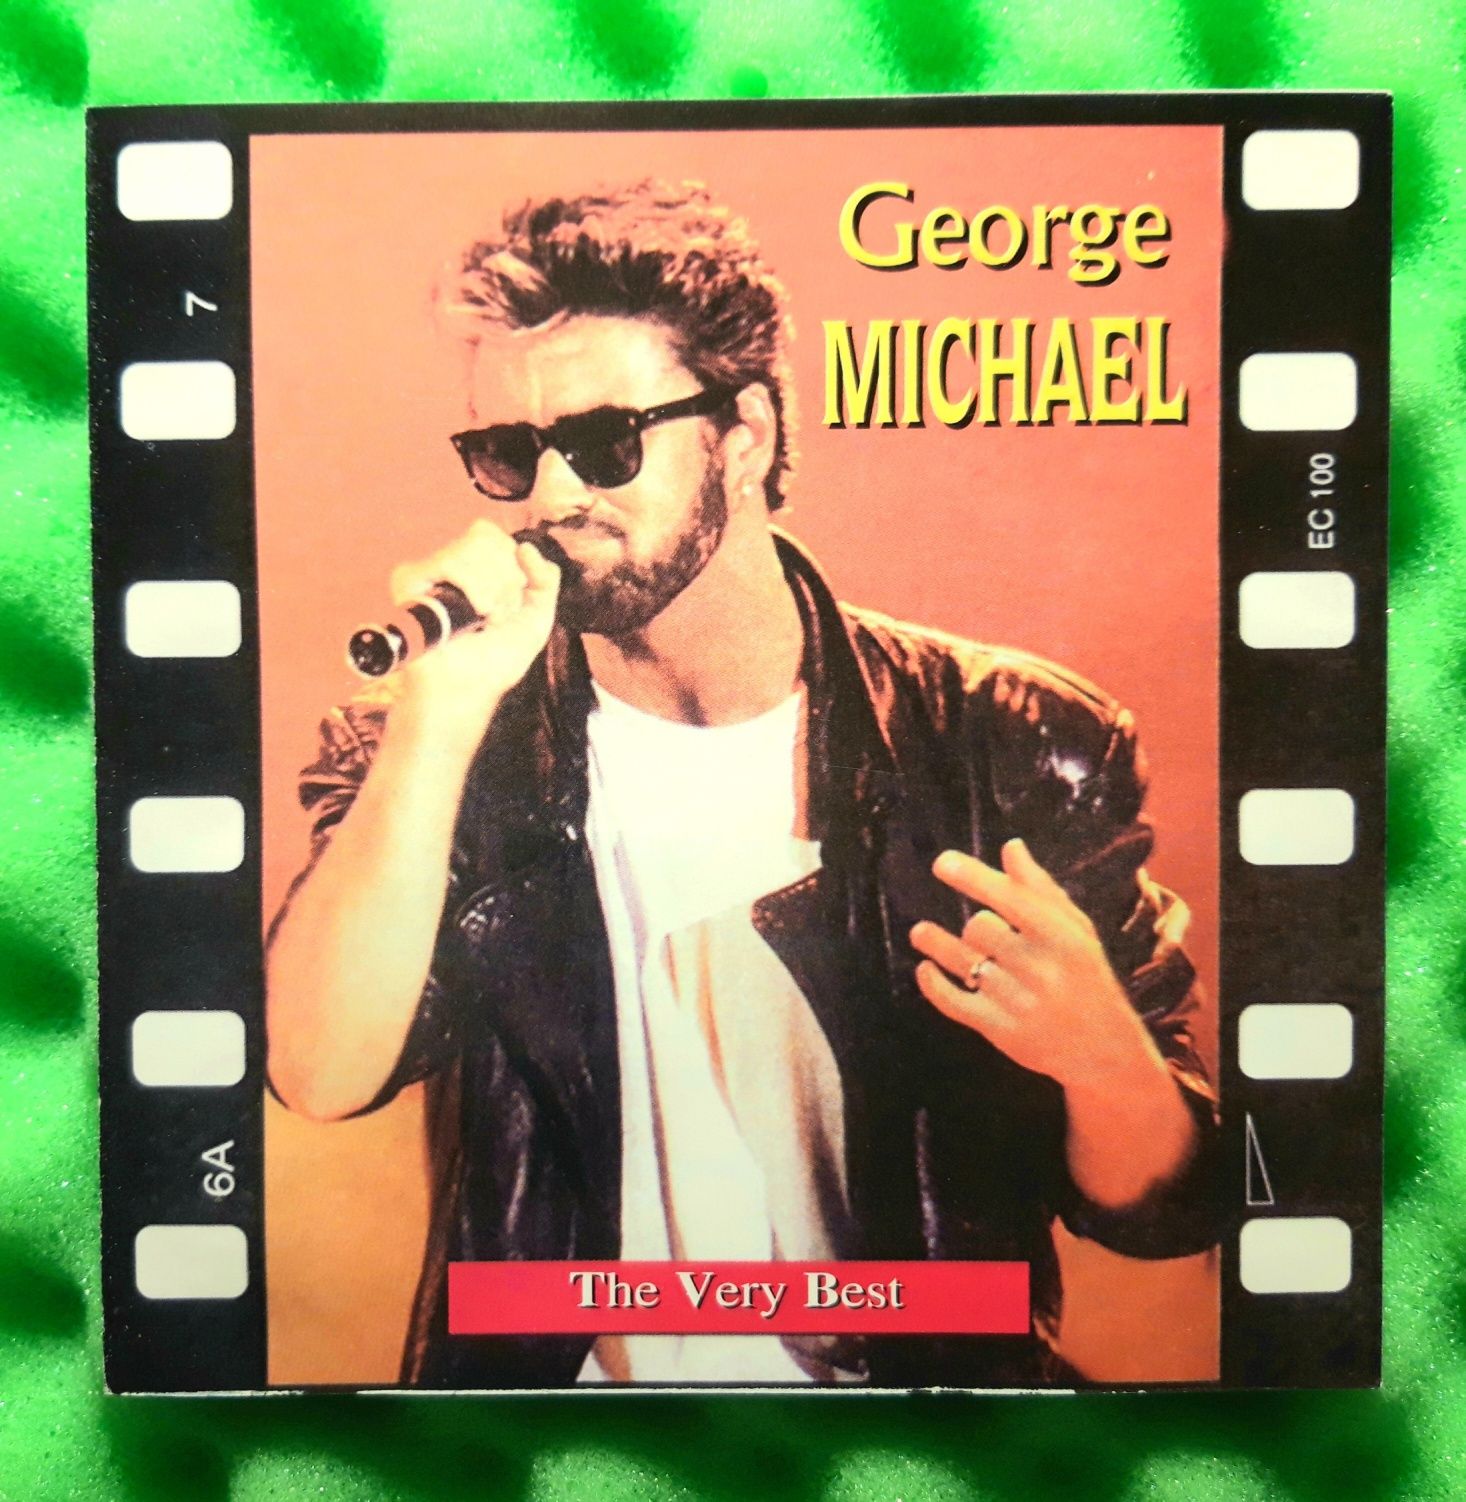 George Michael – The Very Best (CD, 1995)